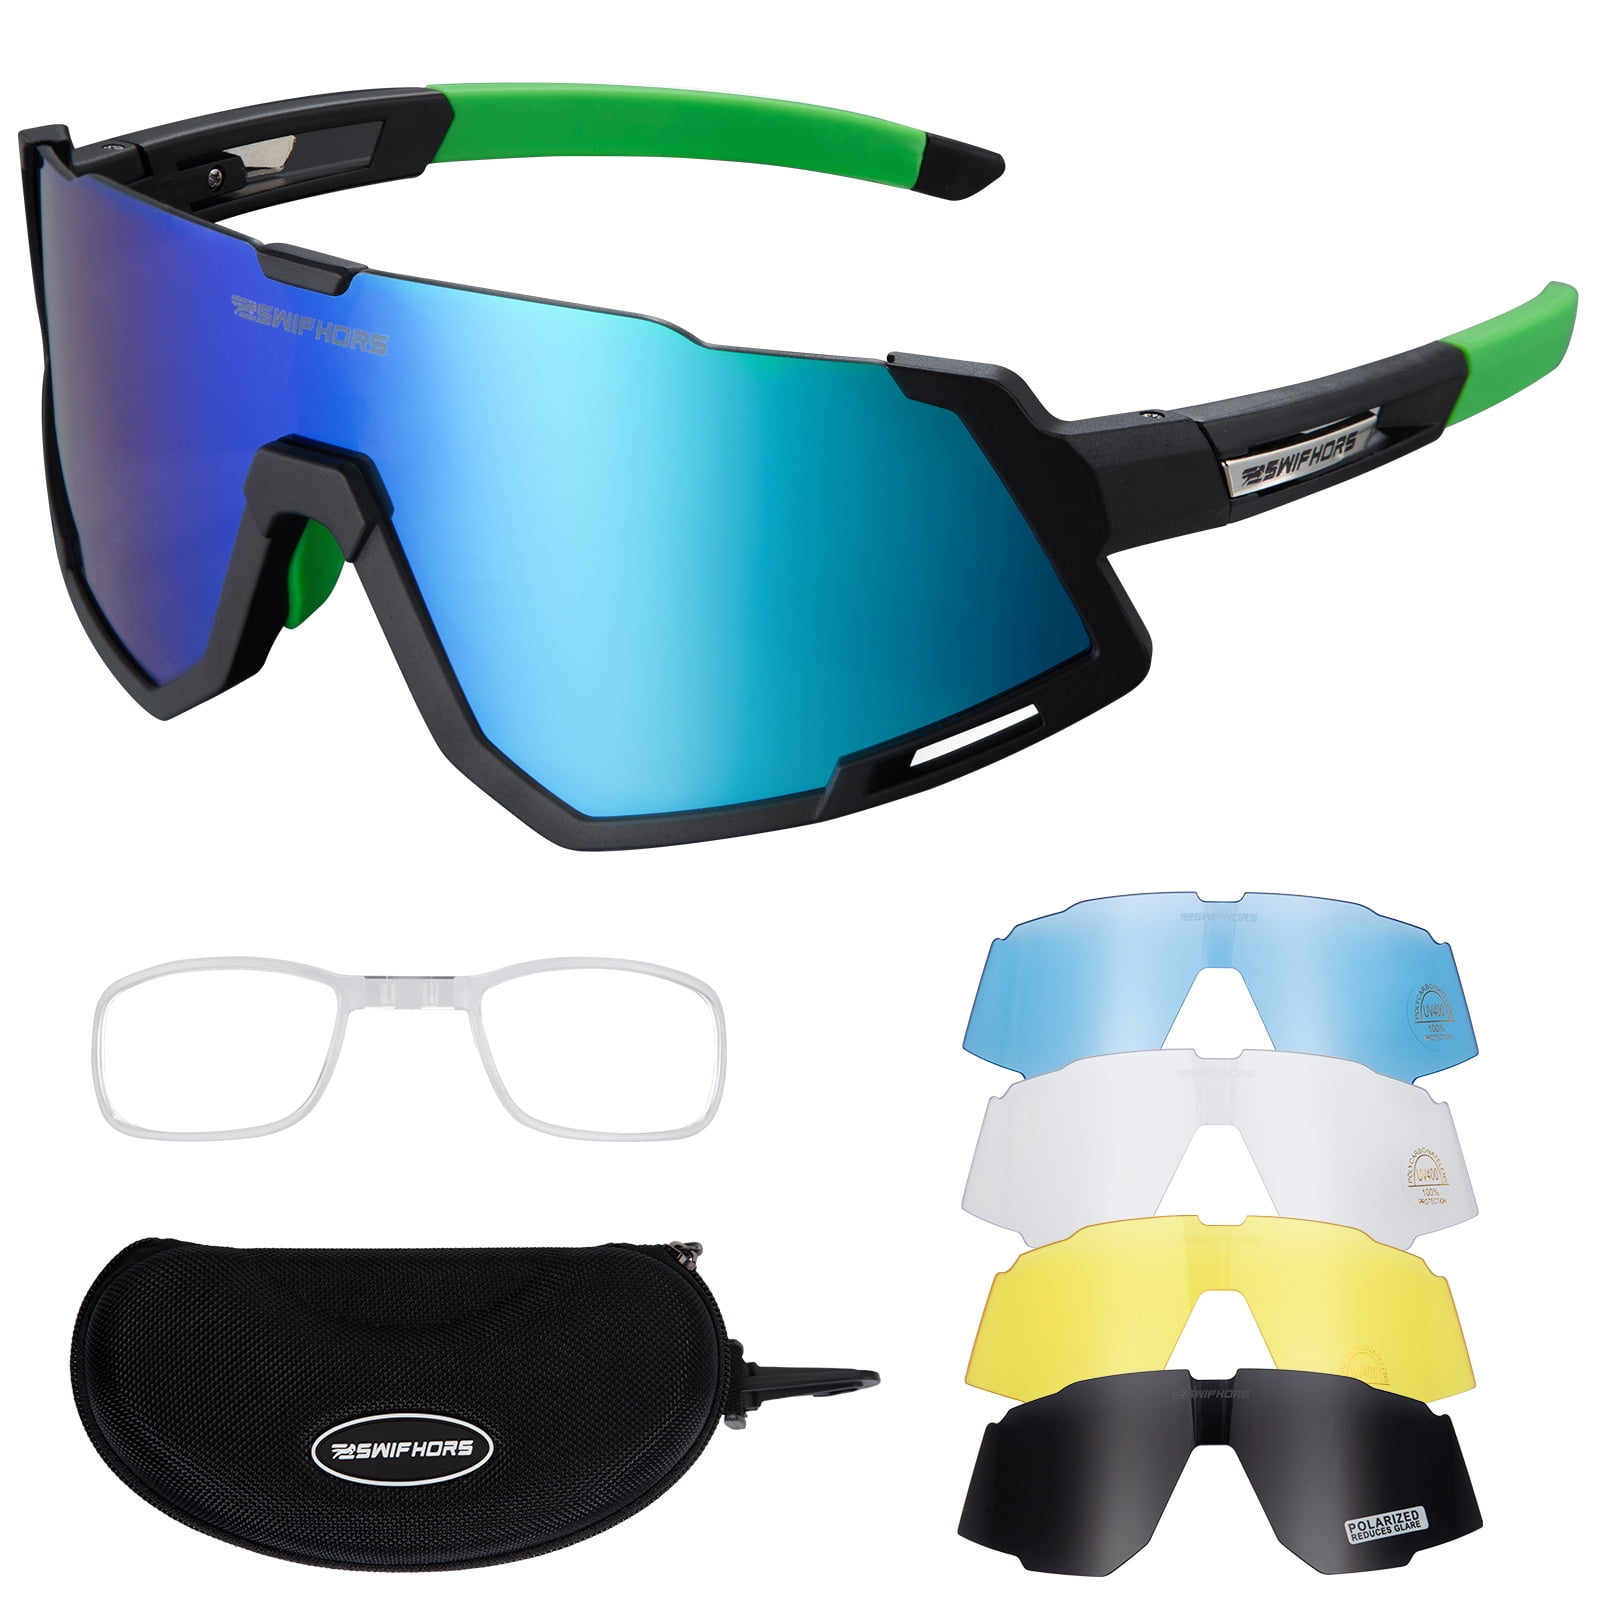 Polarized Sports Sunglasses Cycling Sunglasses for Men Women with 4 Interchangeable Lenses for Climbing Riding 